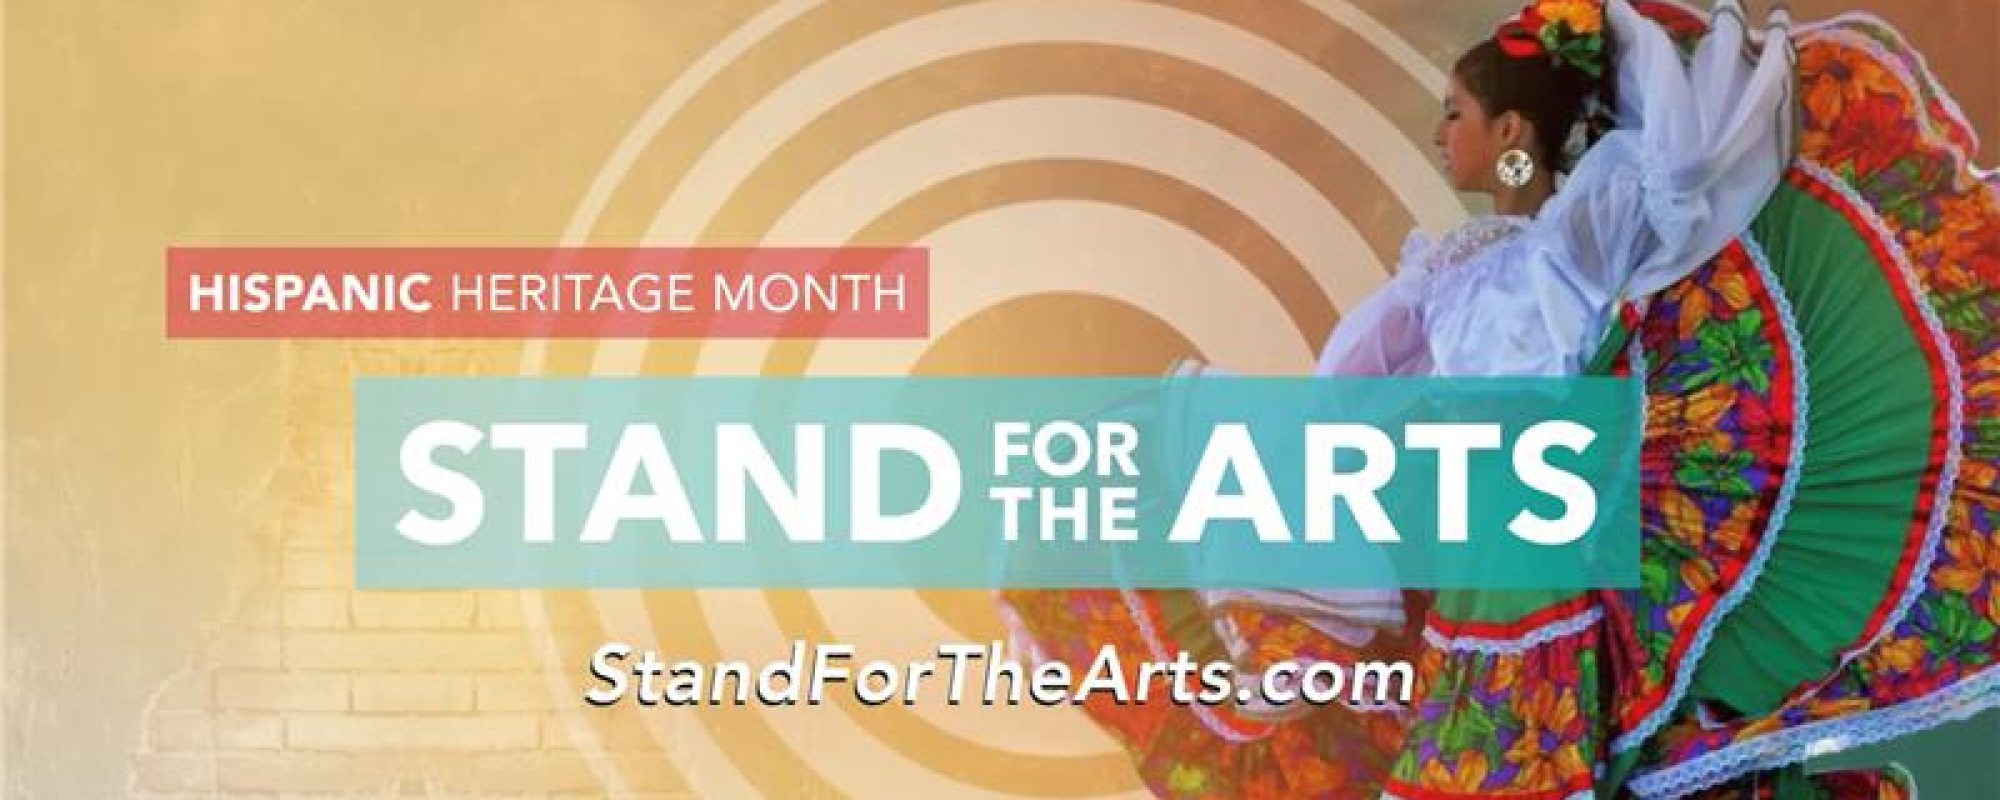 OVATION TV CELEBRATES NATIONAL HISPANIC HERITAGE MONTH WITH ON-AIR PUBLIC SERVICE ANNOUNCEMENTS HIGHLIGHTING THE NATIONAL HISPANIC FOUNDATION FOR THE ARTS AND BALLET HISPÁNICO